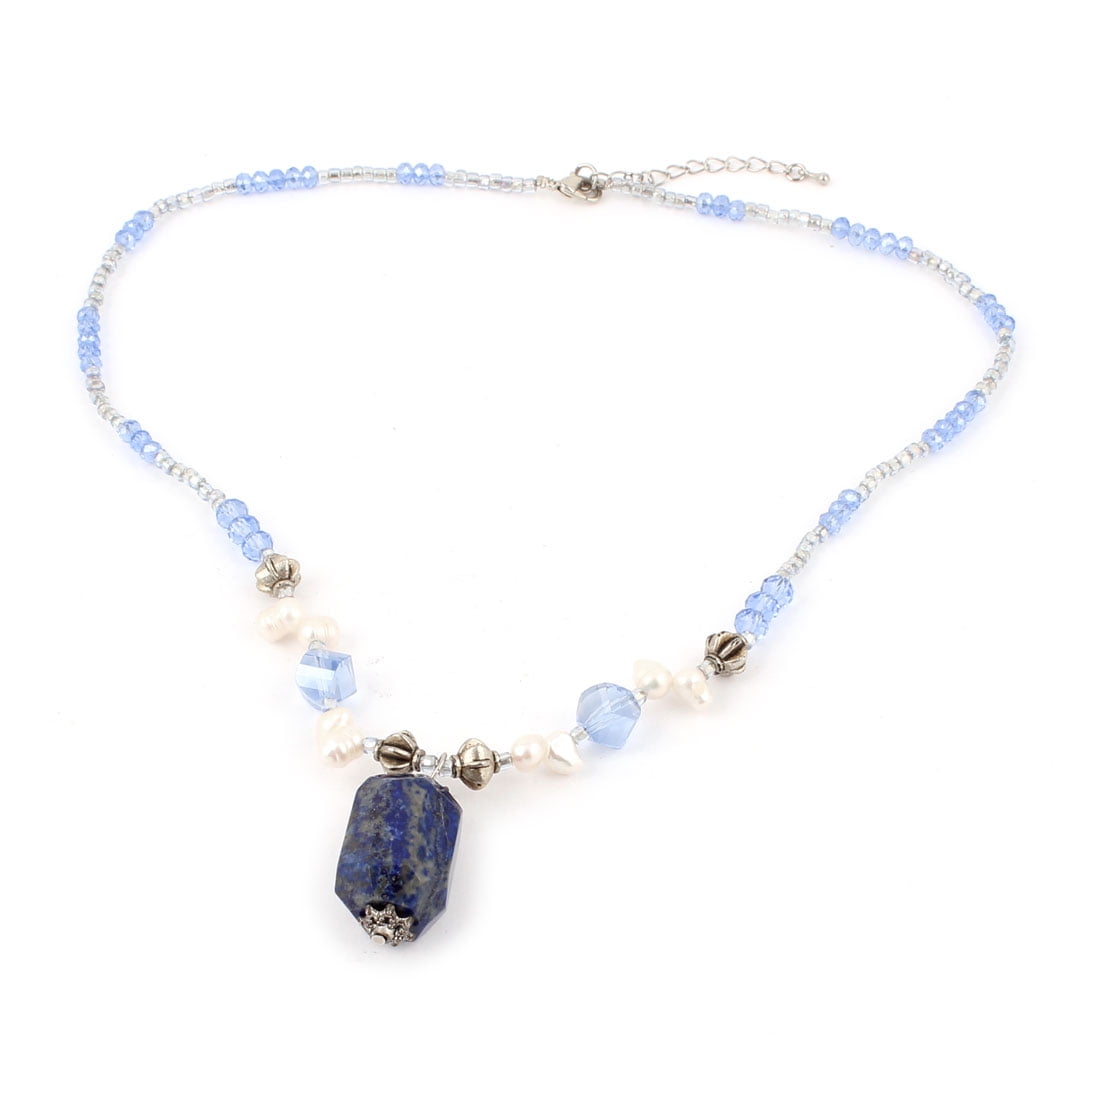 choker necklace with stone pendant